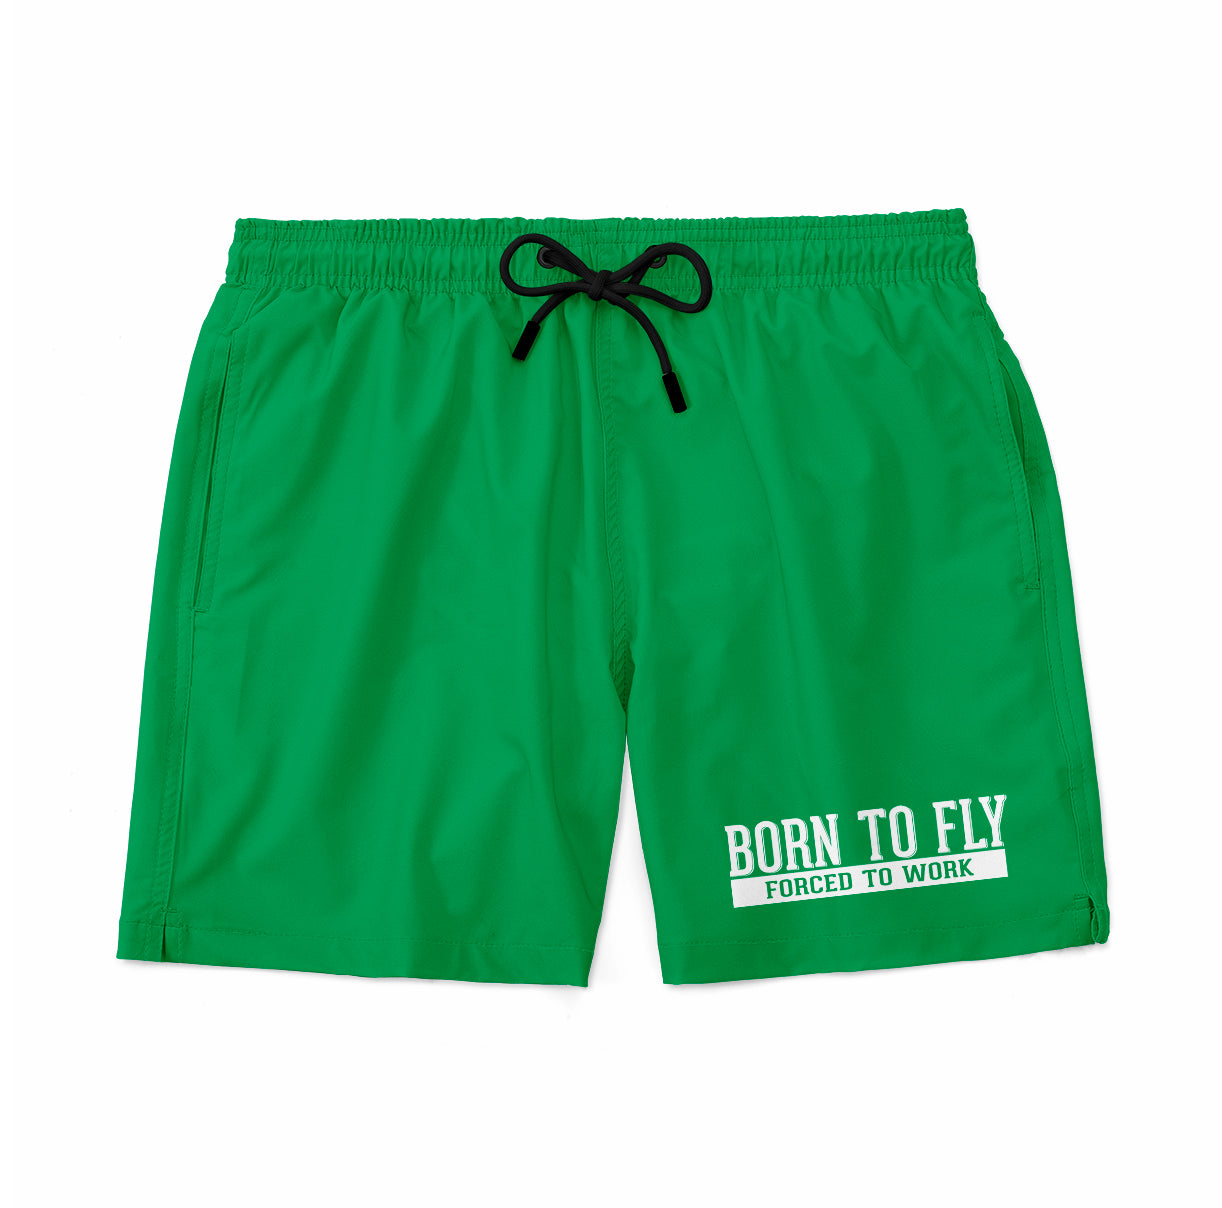 Born To Fly Forced To Work Designed Swim Trunks & Shorts